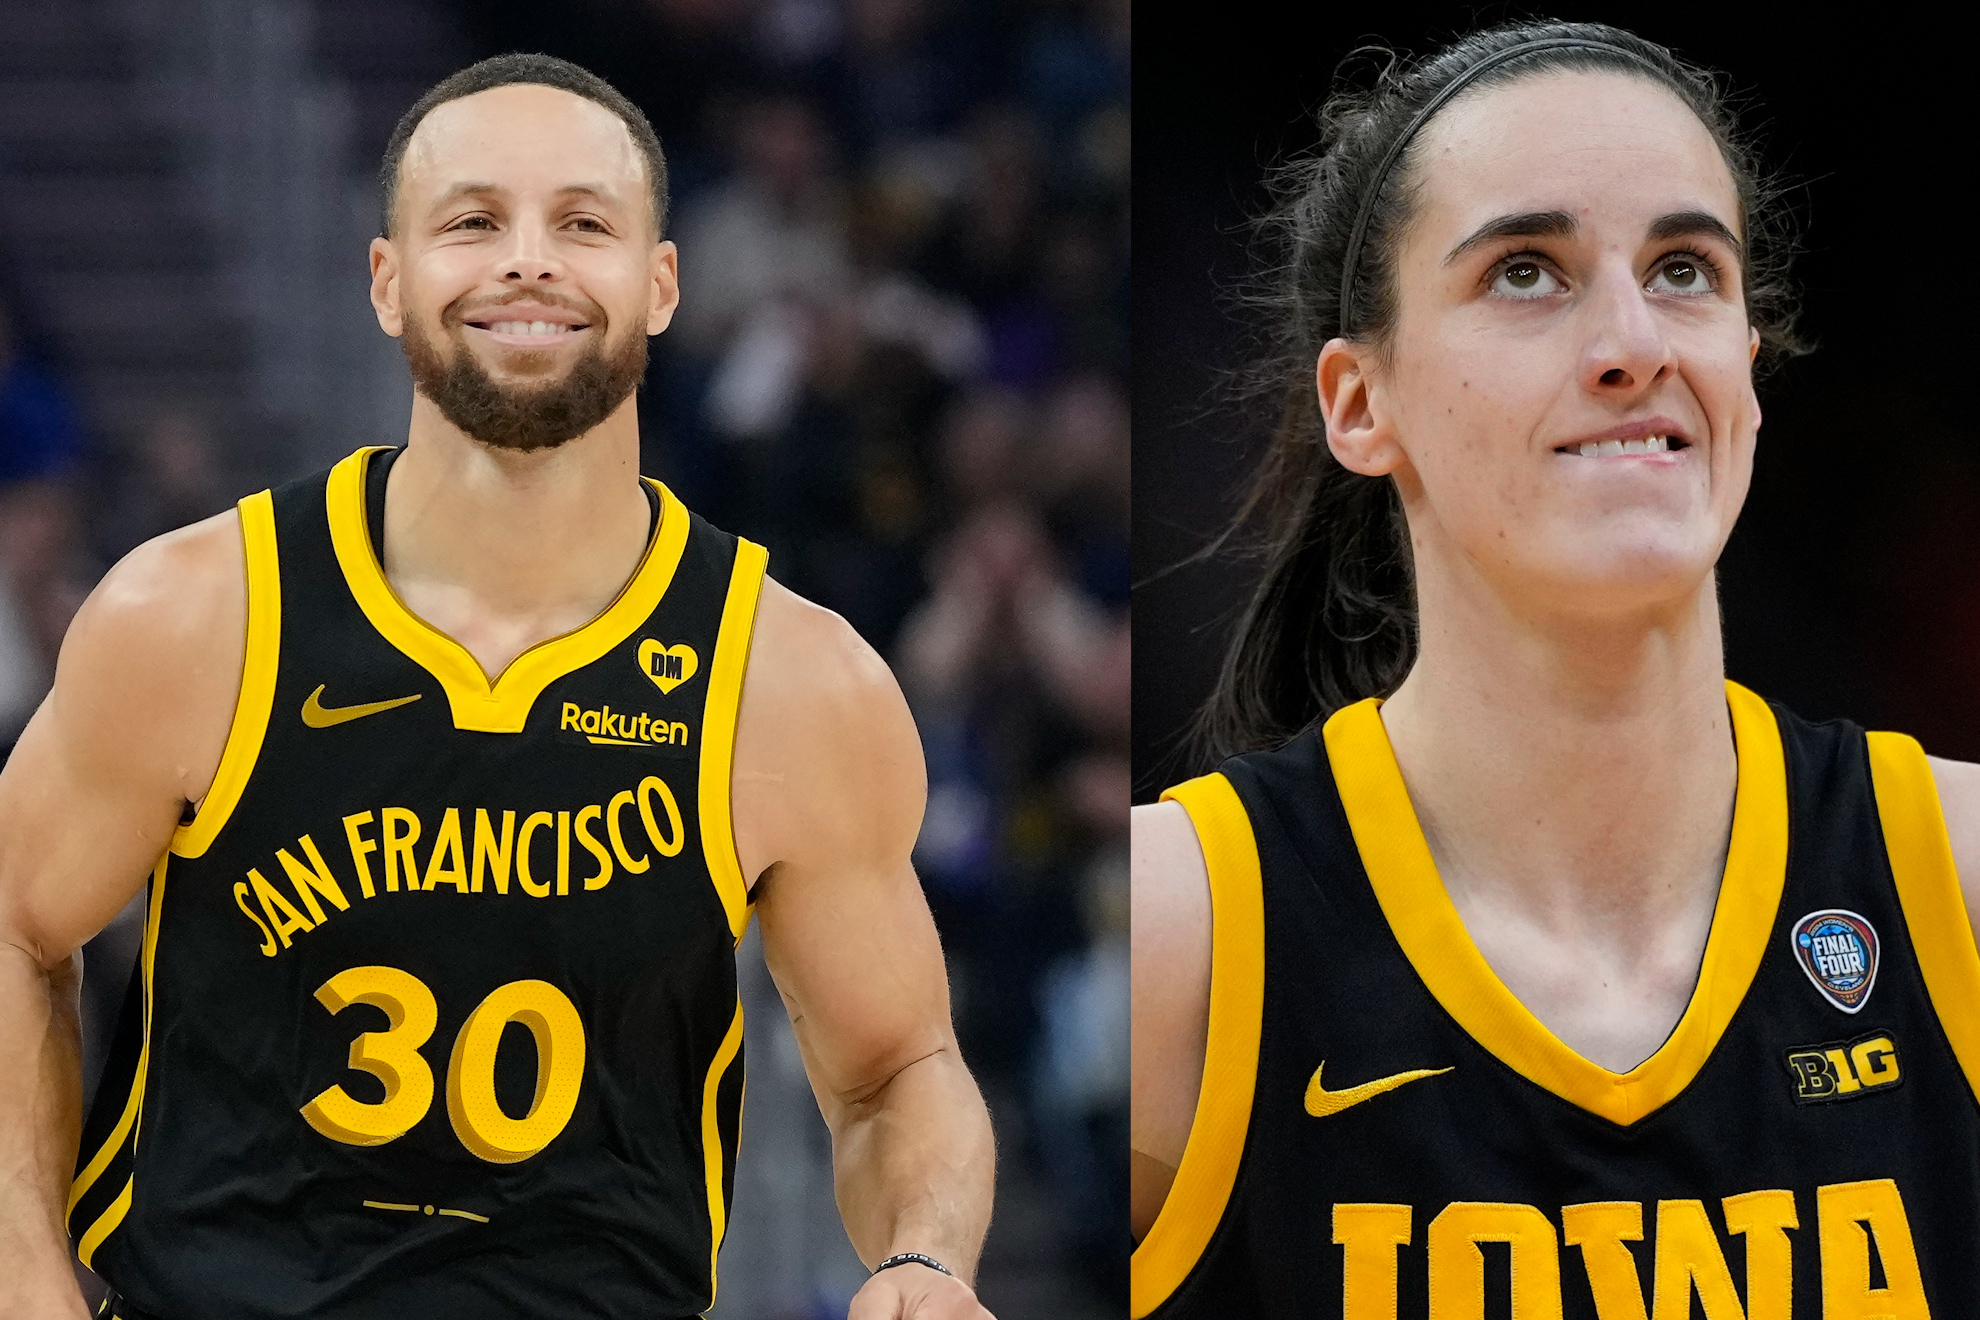 Stephen Curry tried to recruit Caitlin Clark to Under Armour and Curry brand